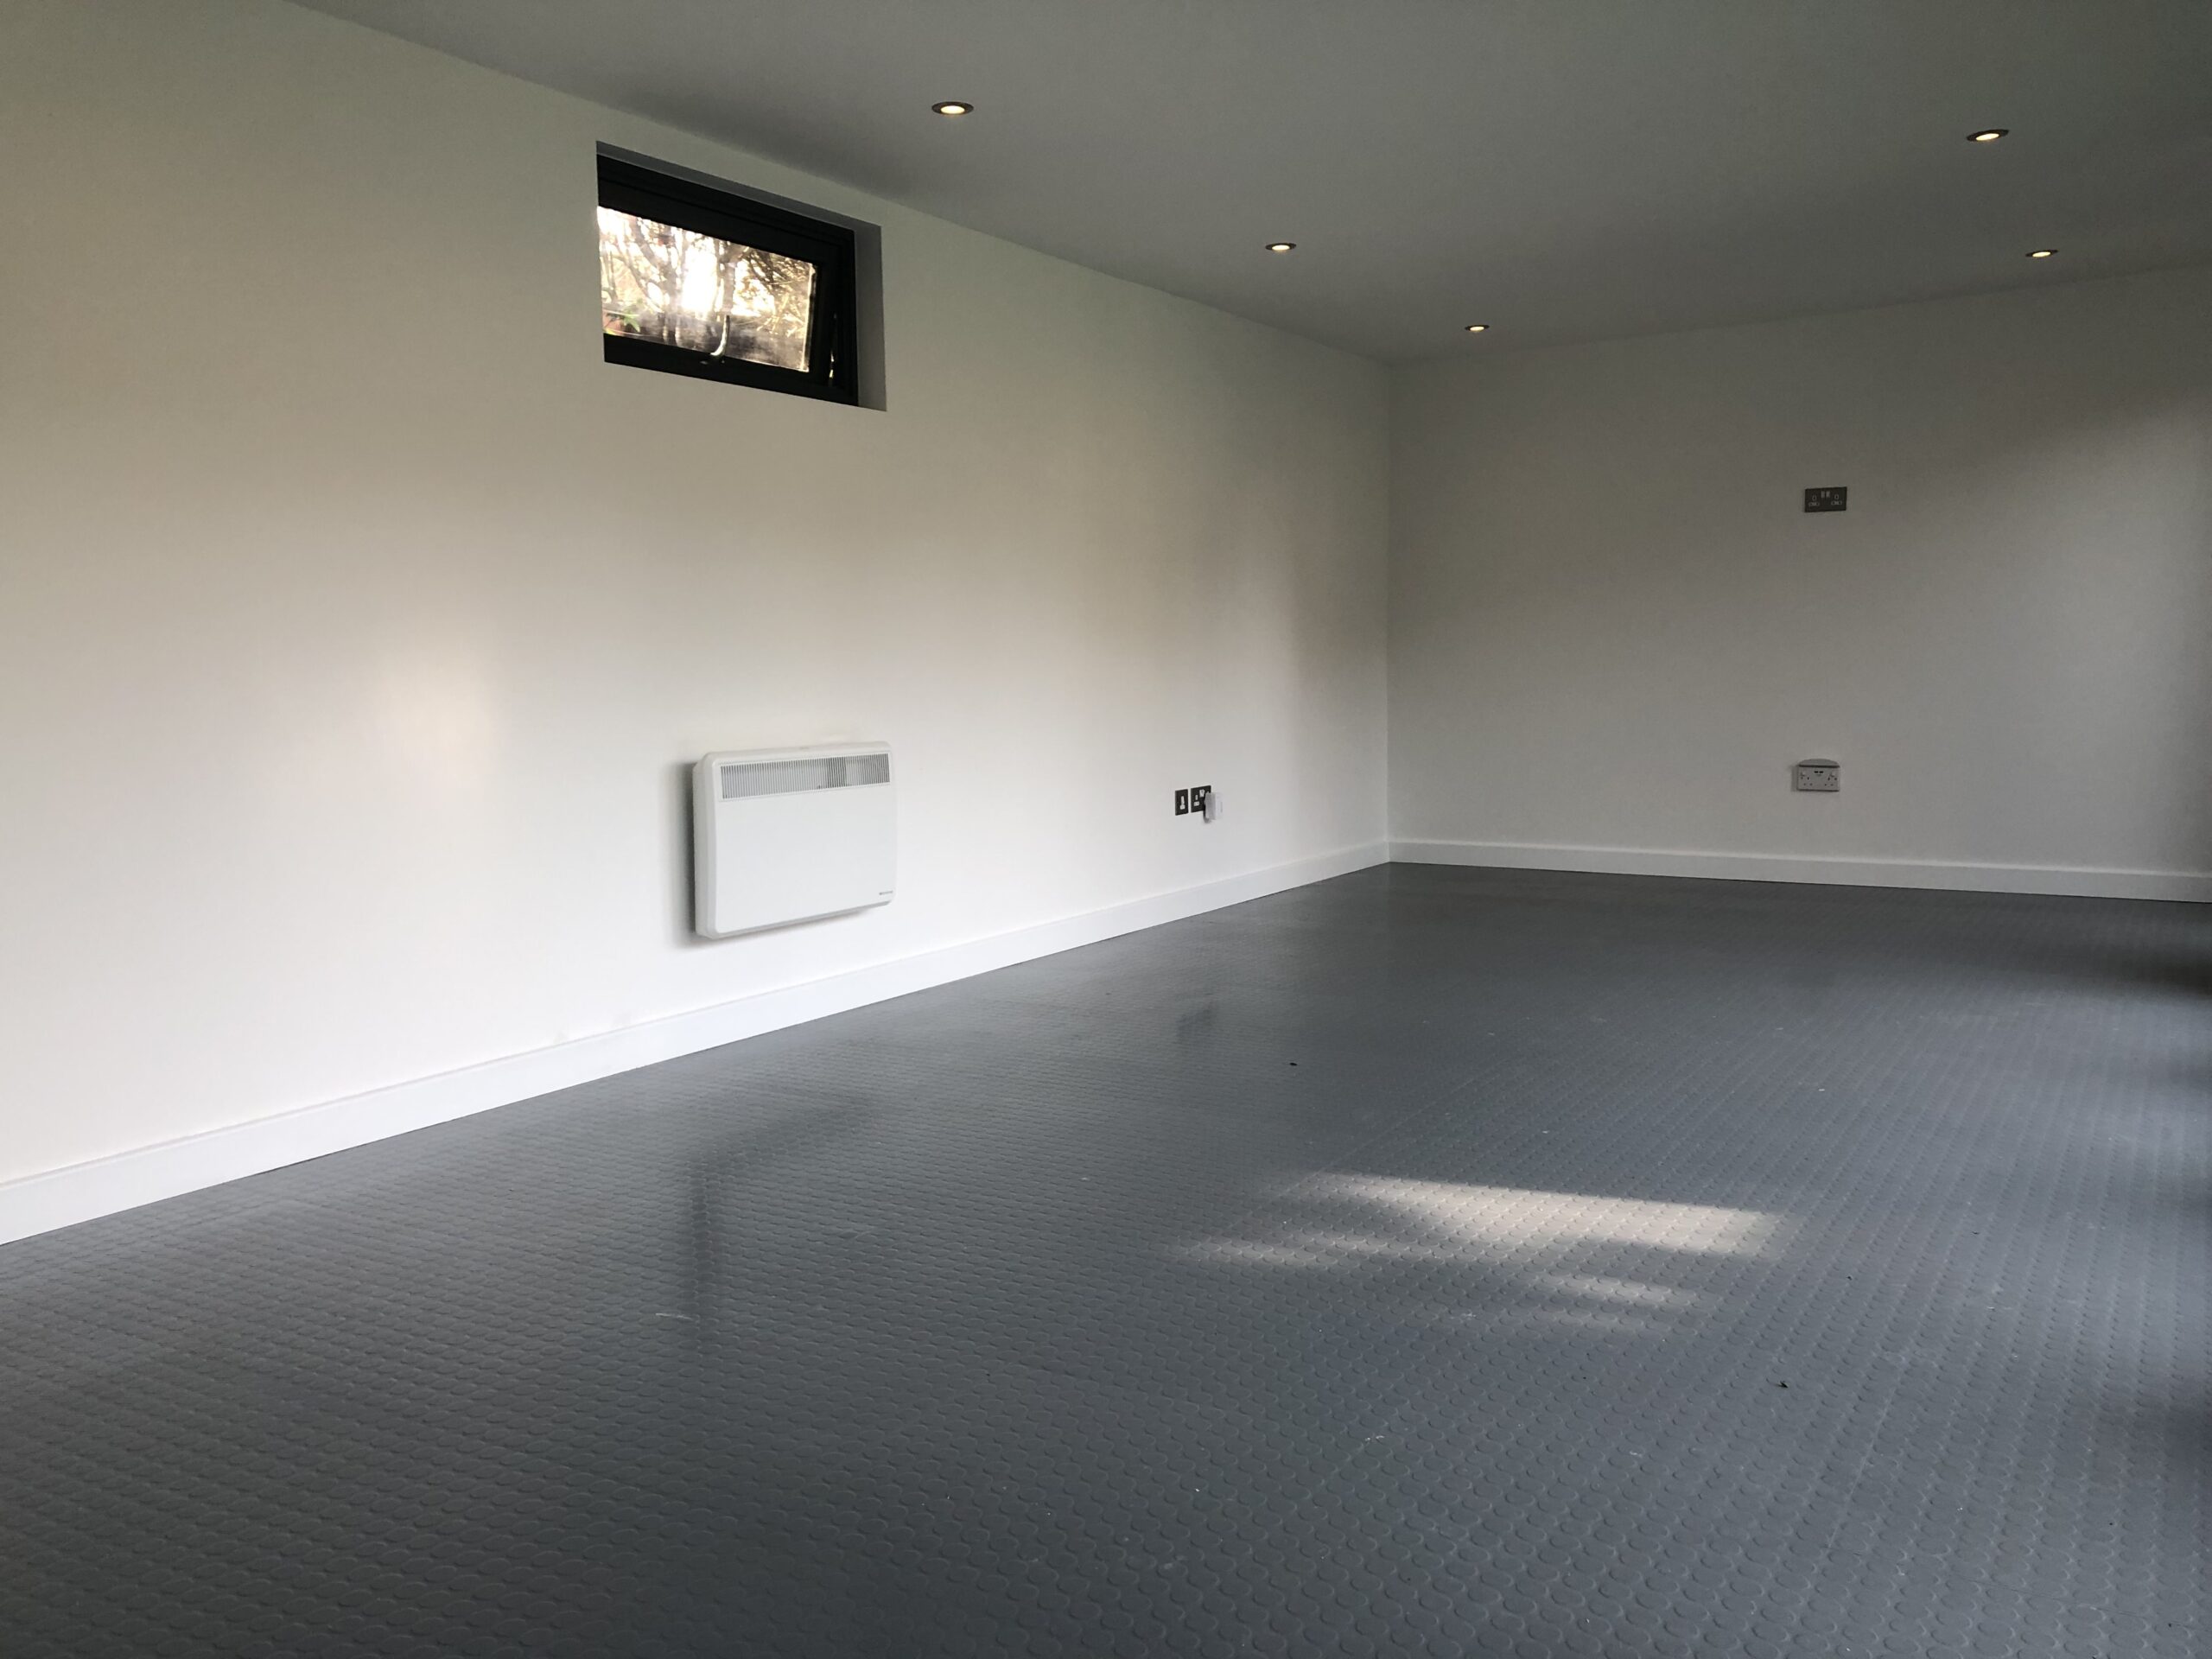 Unfurnished Vivid Green family garden room interior with grey rubber tiled flooring, recessed lights, white walls with electrical outlets, panel heater under a small black-framed window and a TV wall mount.